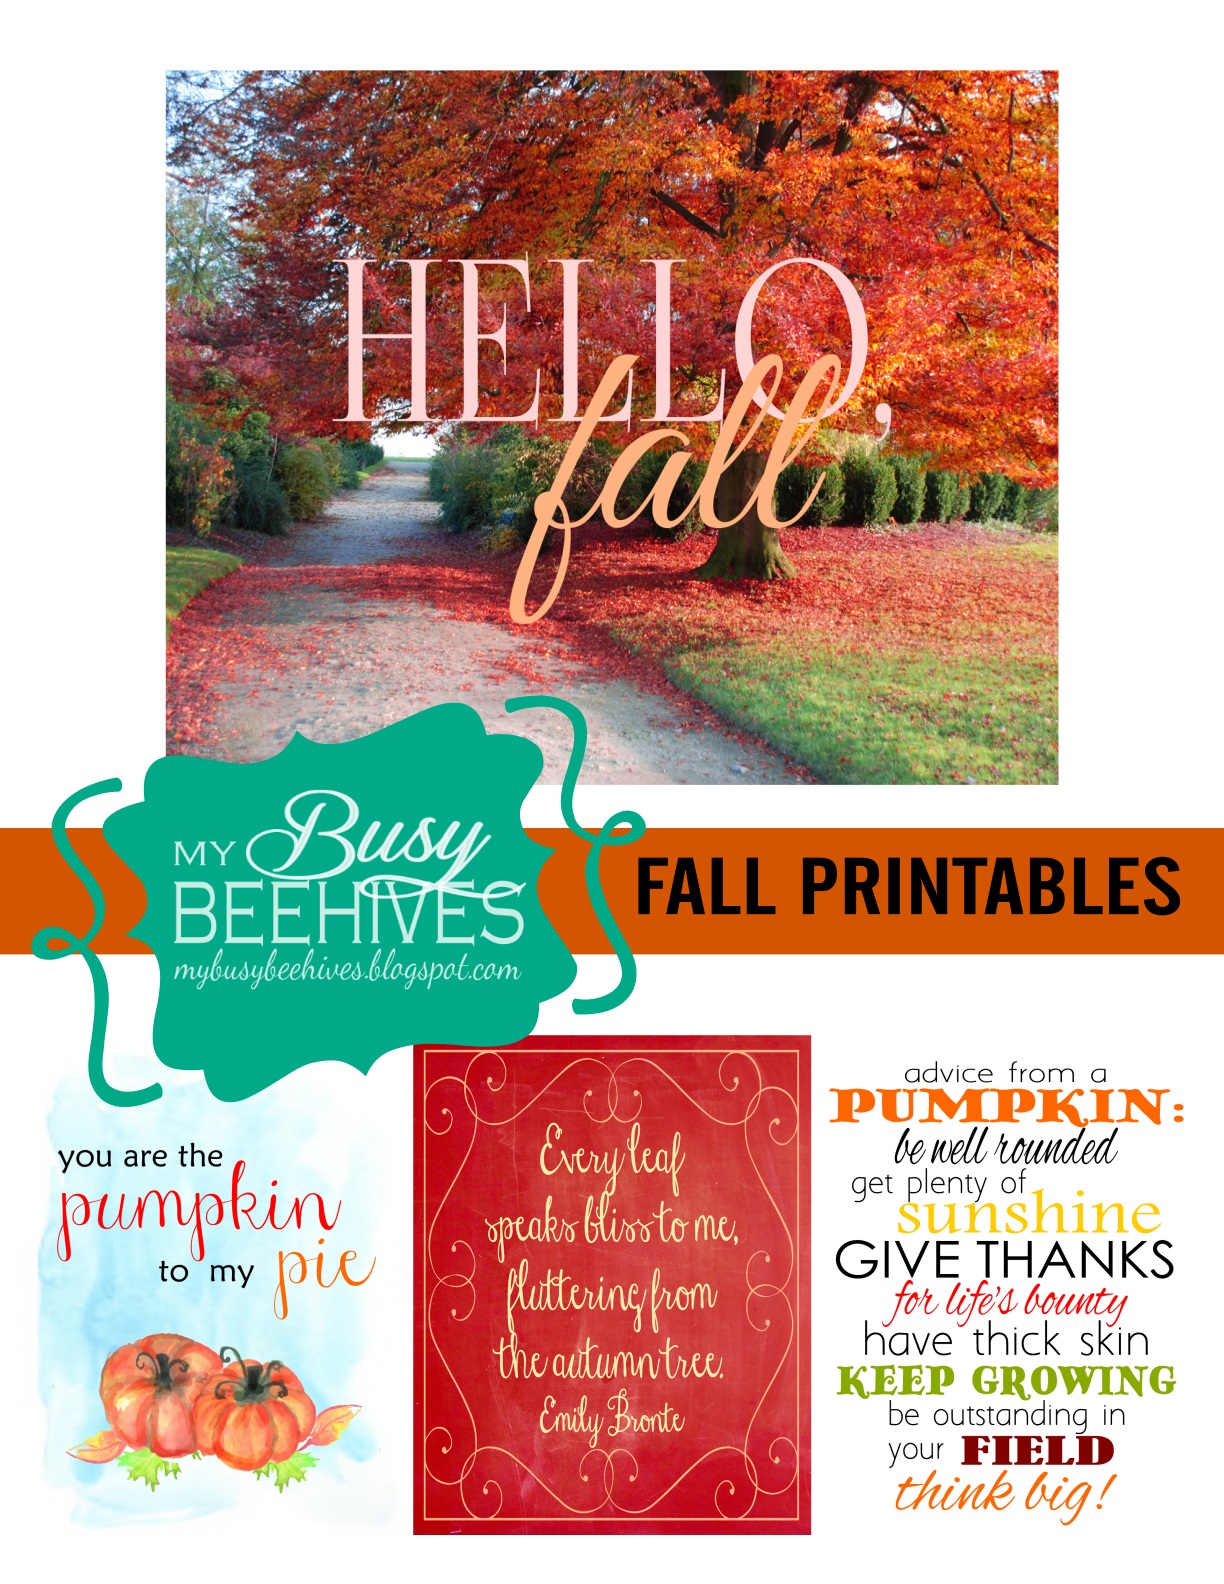 My Busy Beehives...: Fall Printables